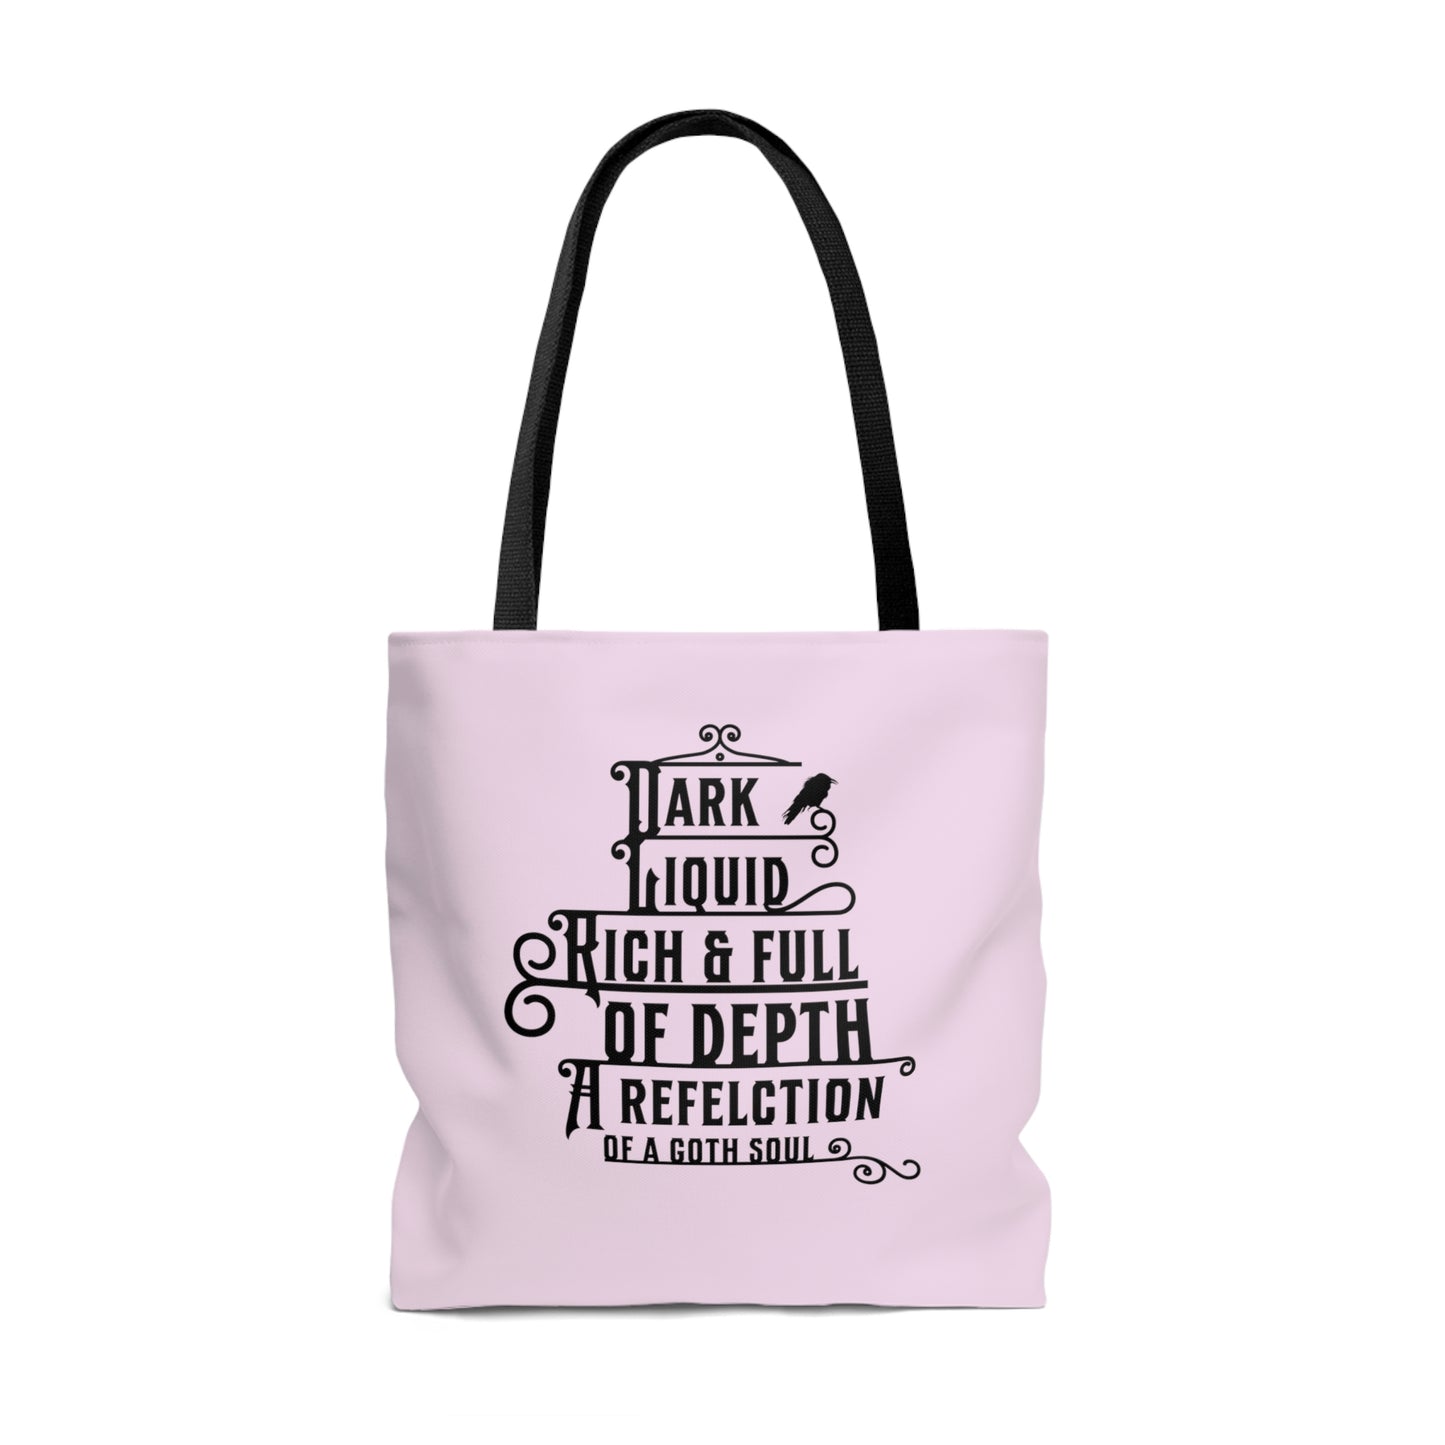 Minimalistic Goth Cat & Coffee Lovers Large Eco Tote Bag for Book Lovers, Dual Printed, Book Reader Gift Ideas - Pink Large Eco Tote Bag